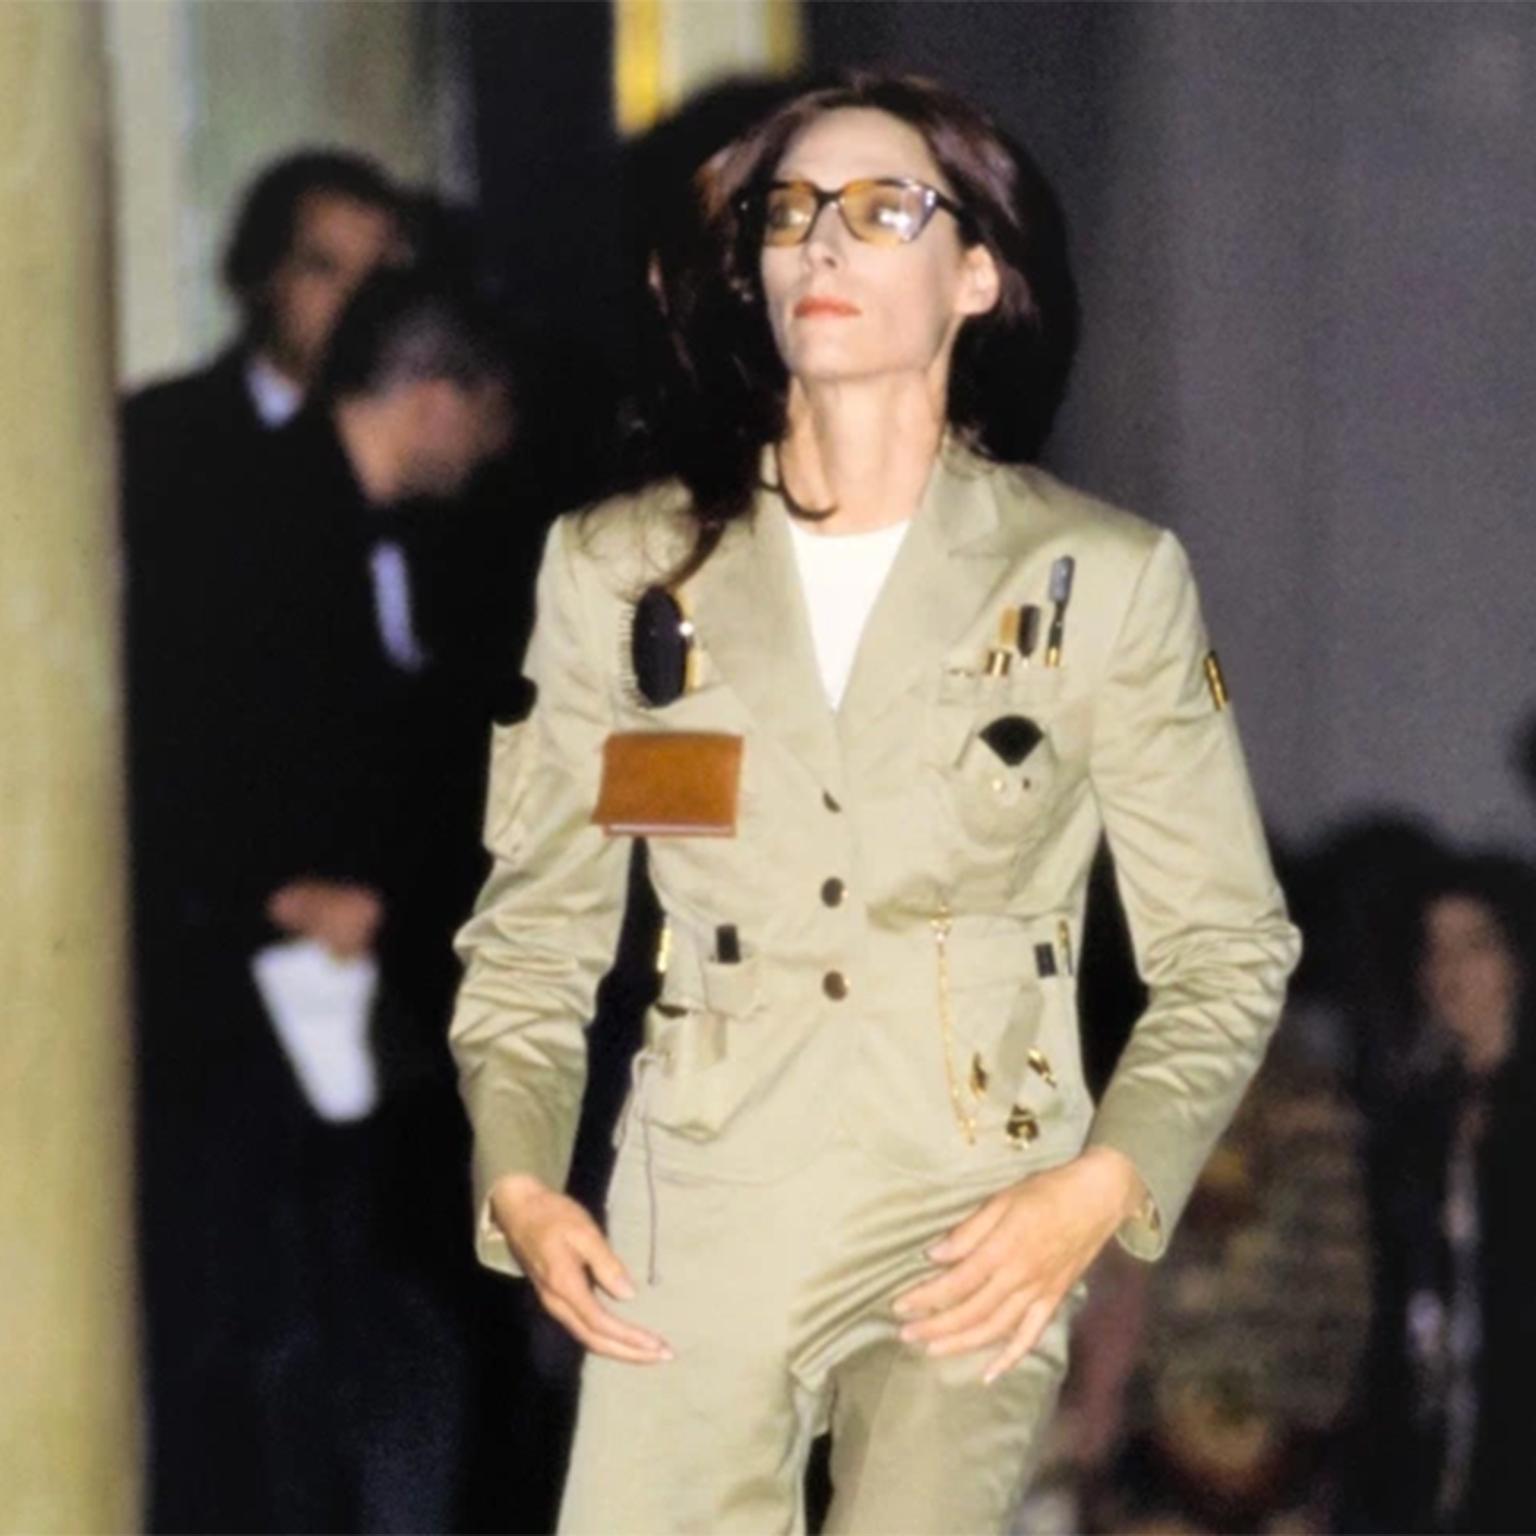 This is a very rare Spring Summer 1991 Franco Moschino Couture Khaki safari style Survival Jacket with tools to survive the urban jungle!  This iconic jacket was featured on the runway in our favorite Moschino show in October of 1990 for Spring /